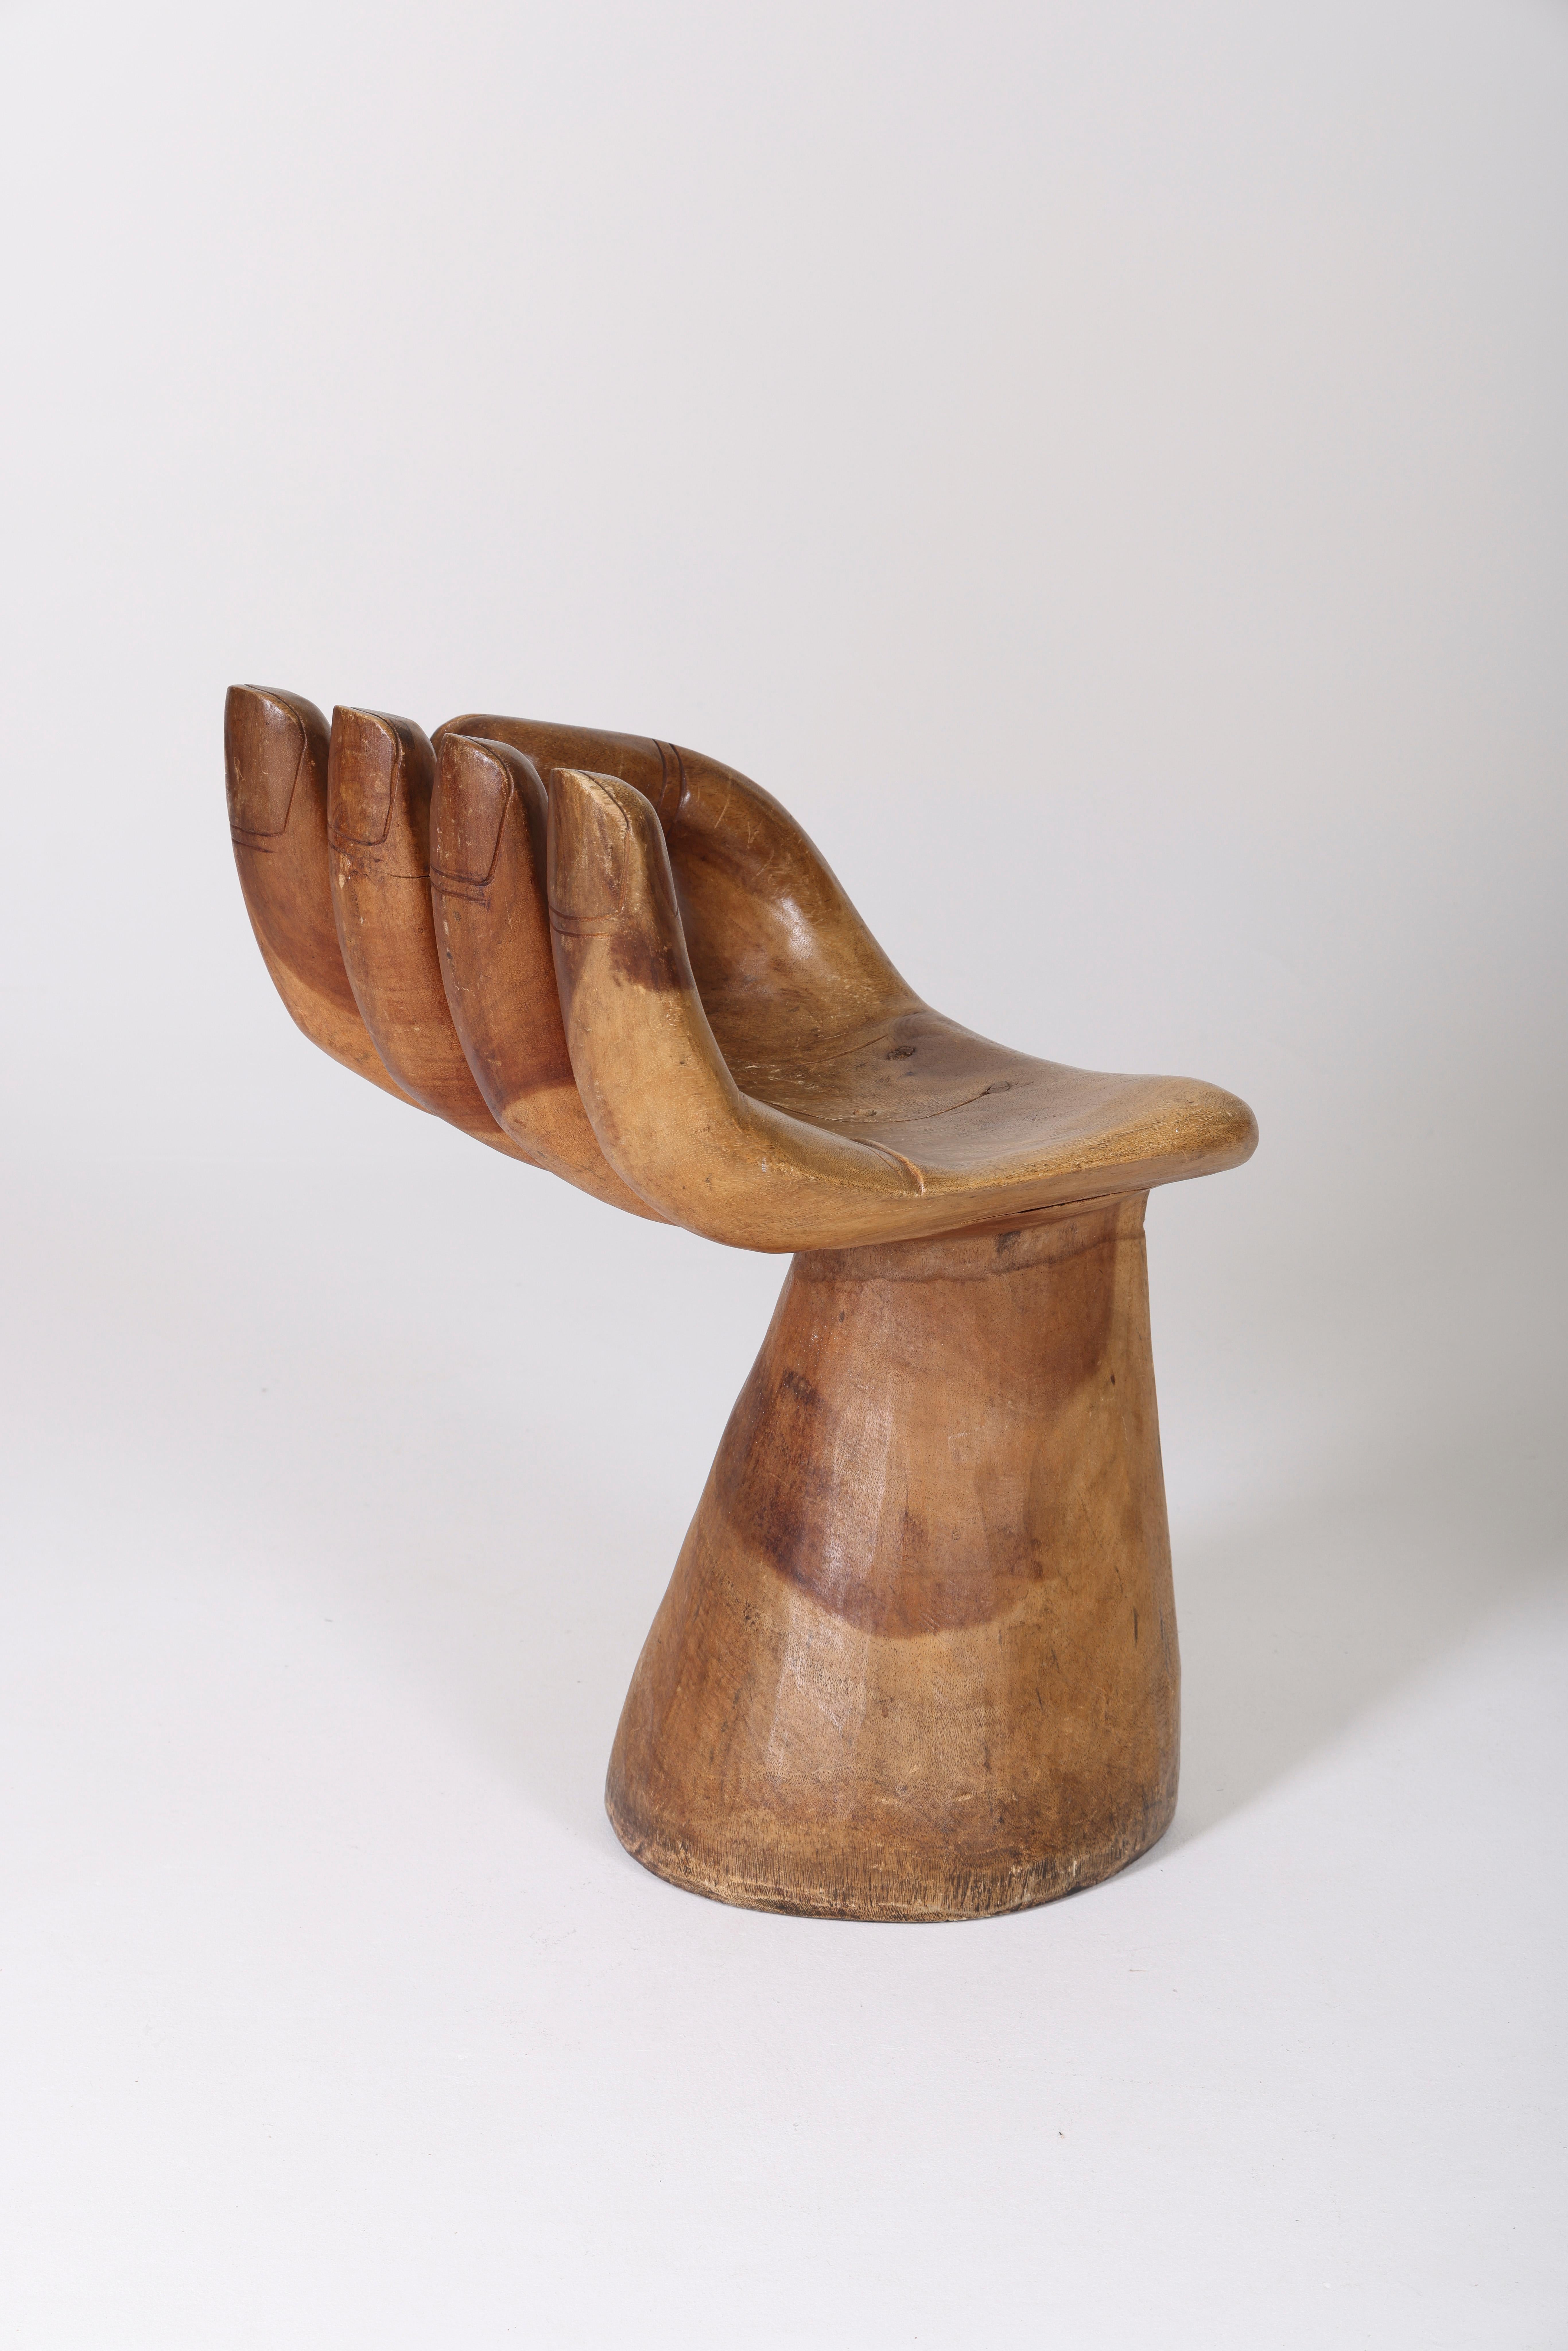 20th Century Solid Wood Hand Chair